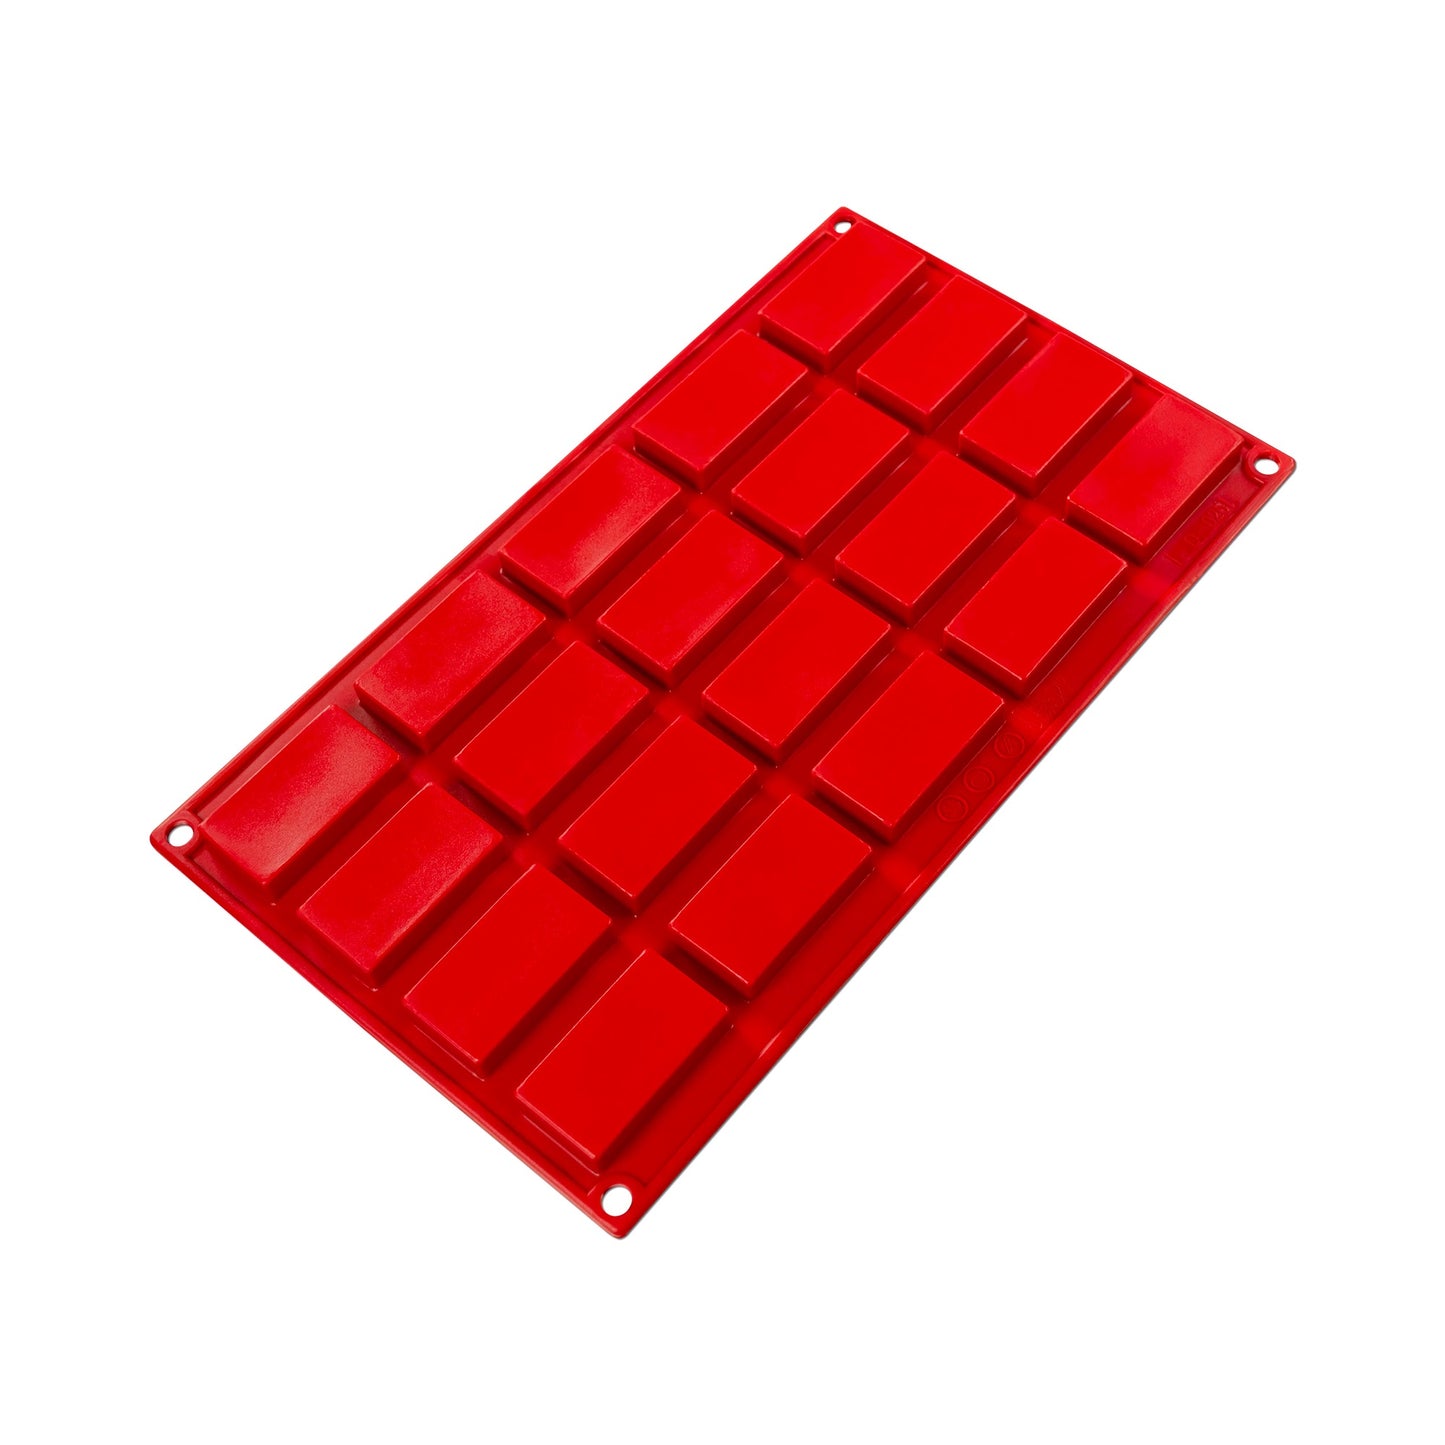 The bottom view of Fat Daddio’s red silicone financier mold, illustrating the sturdy and flexible construction with twenty uniform rectangular protrusions. Each cavity is designed to create crisp edges and a smooth surface for the financiers, showcasing the high-quality design of the mold. The silicone material promises an easy release of the baked goods, ensuring a professional finish.